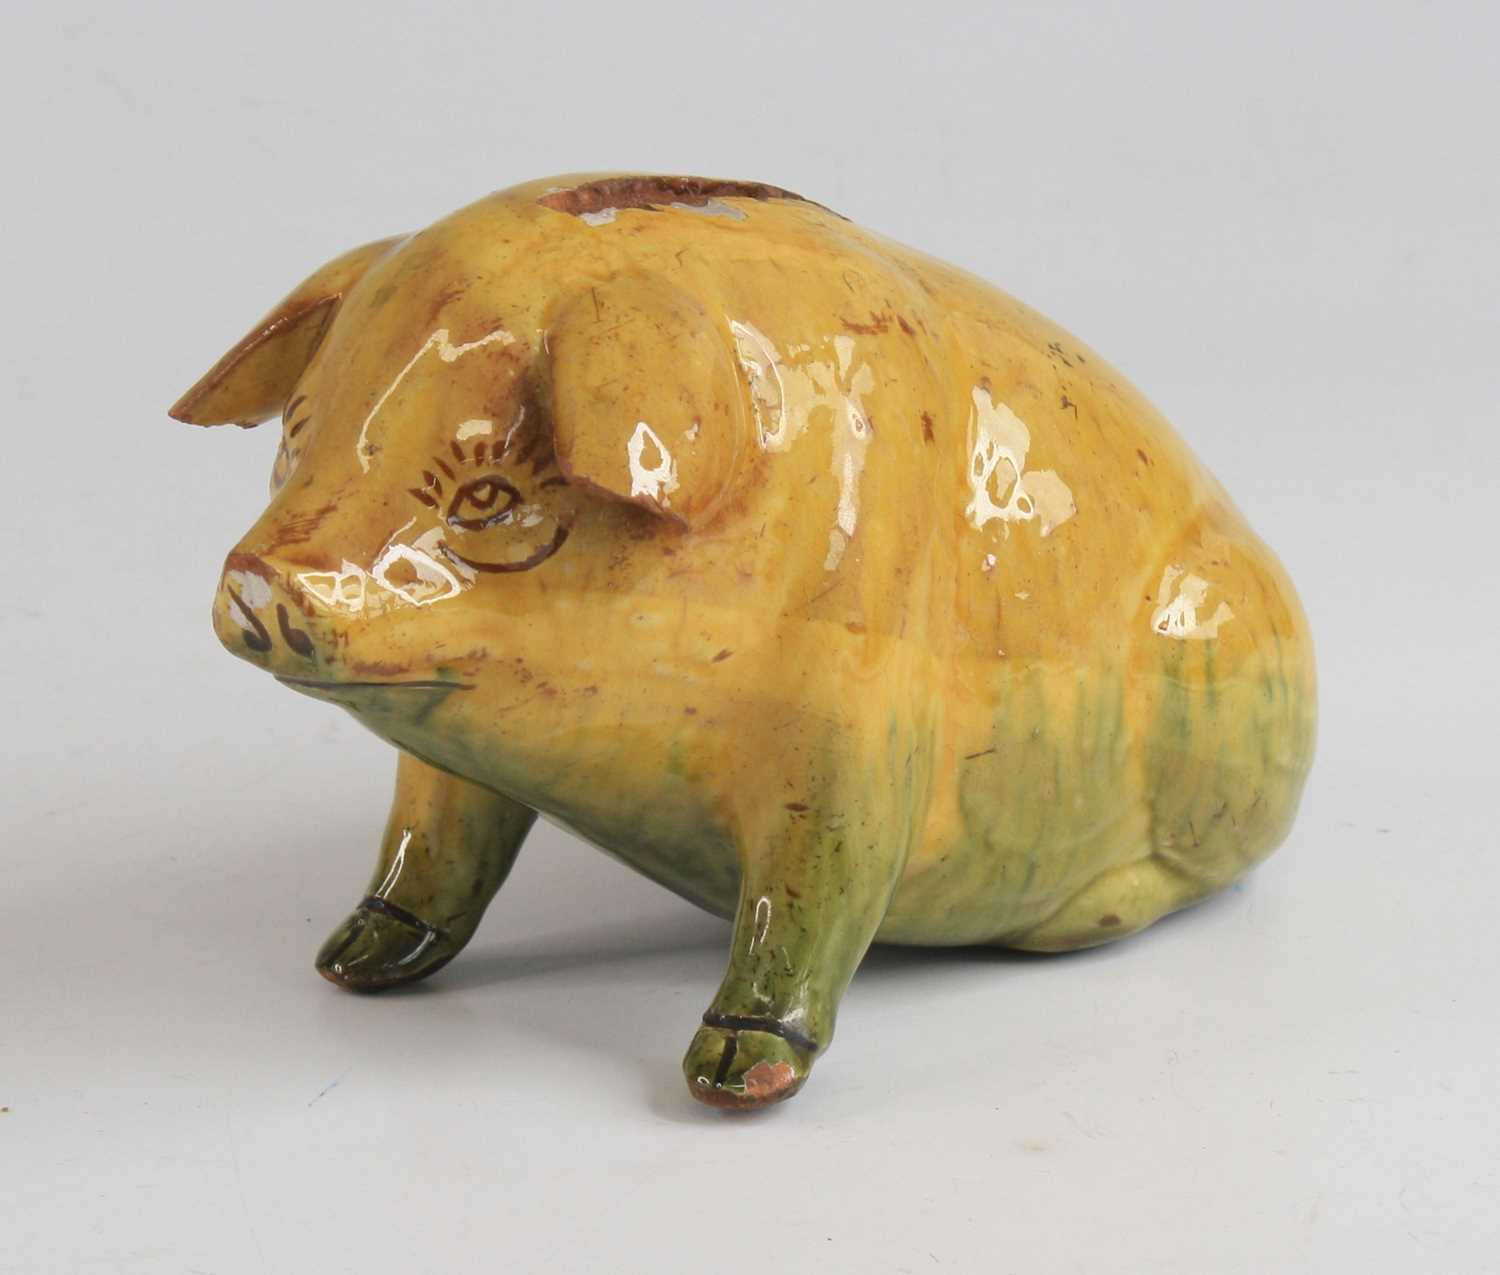 An Ewenny pottery piggy bank, shown in seated pose, having a mottled yellow and green glaze and